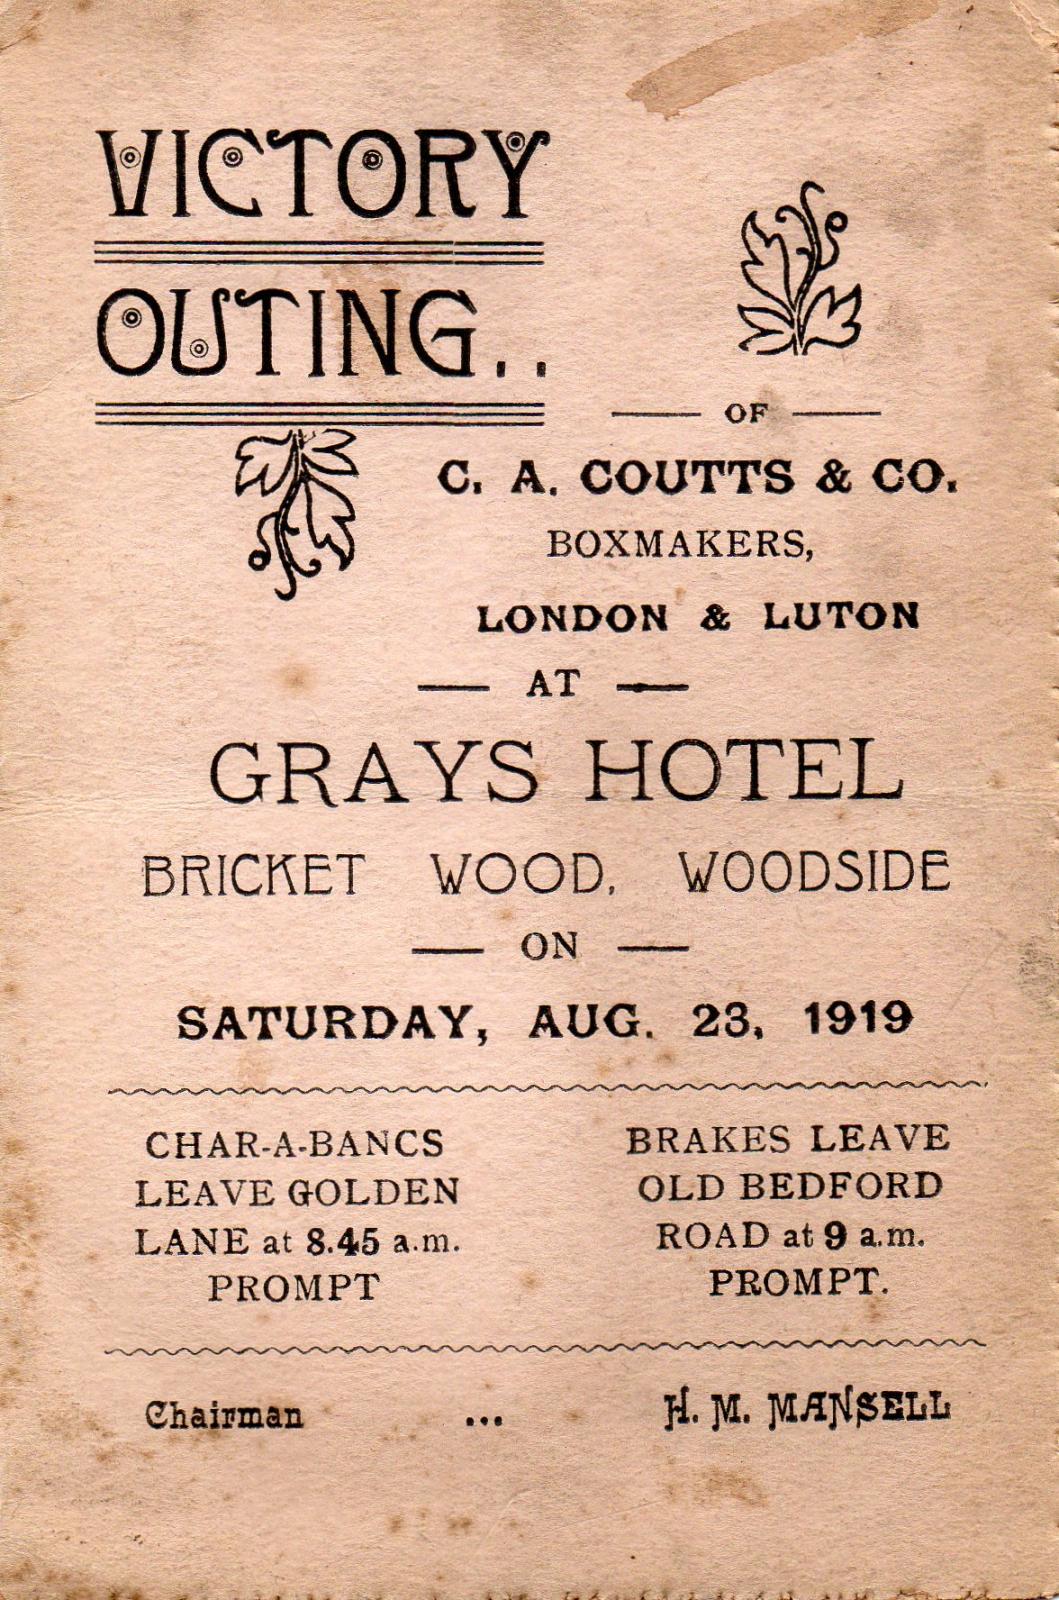 Victory outing of C A Coutts on 23 August 1919